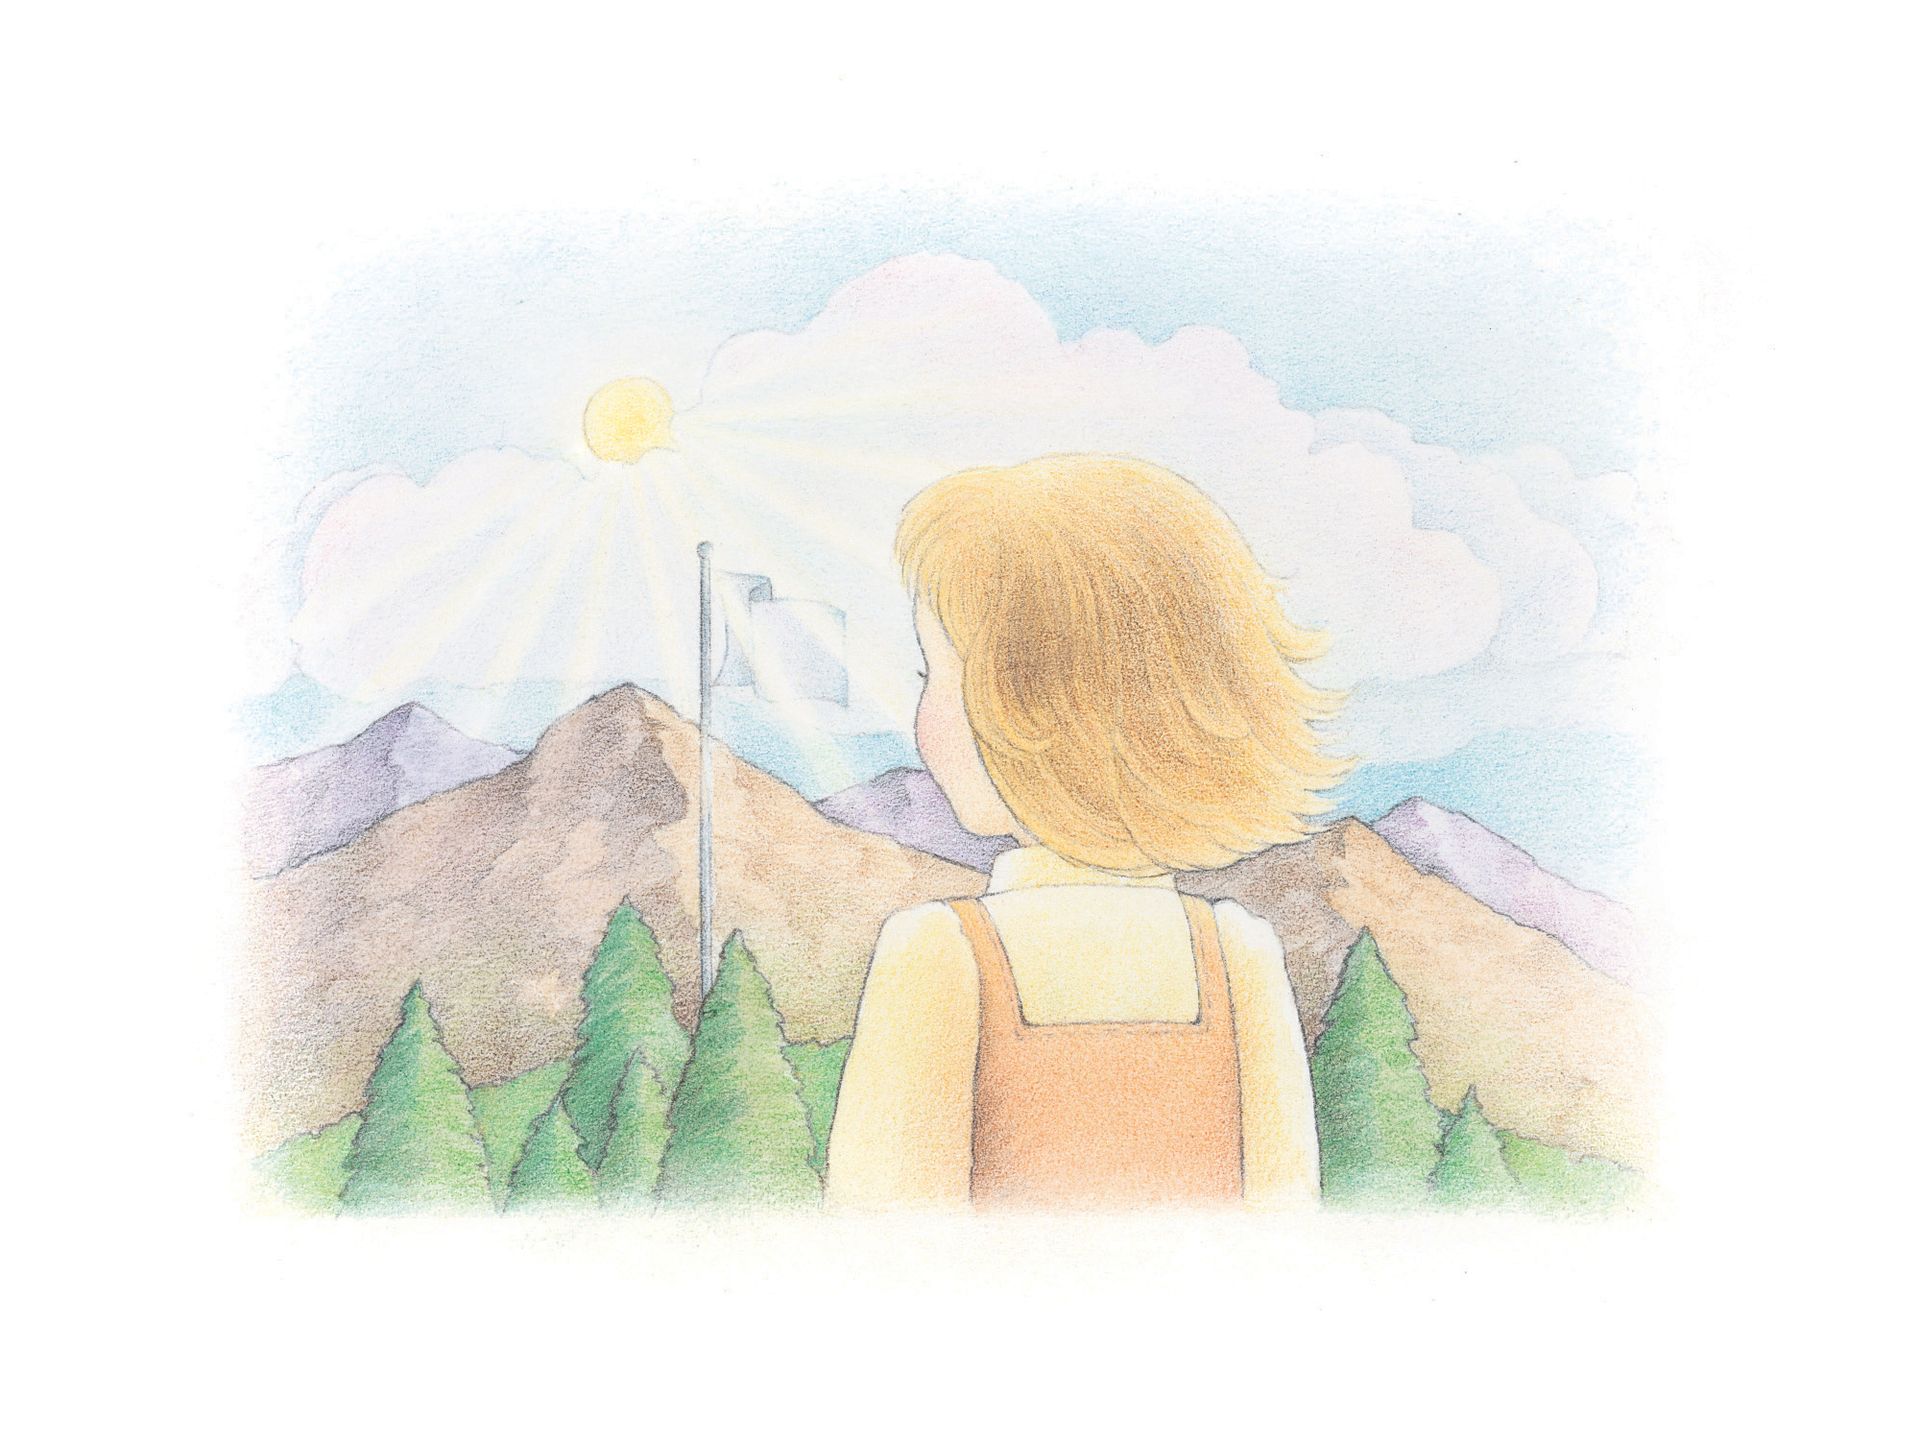 A girl gazing at a flag near a distant mountain range. From the Children’s Songbook, page 224, “My Country”; watercolor illustration by Beth Whittaker.